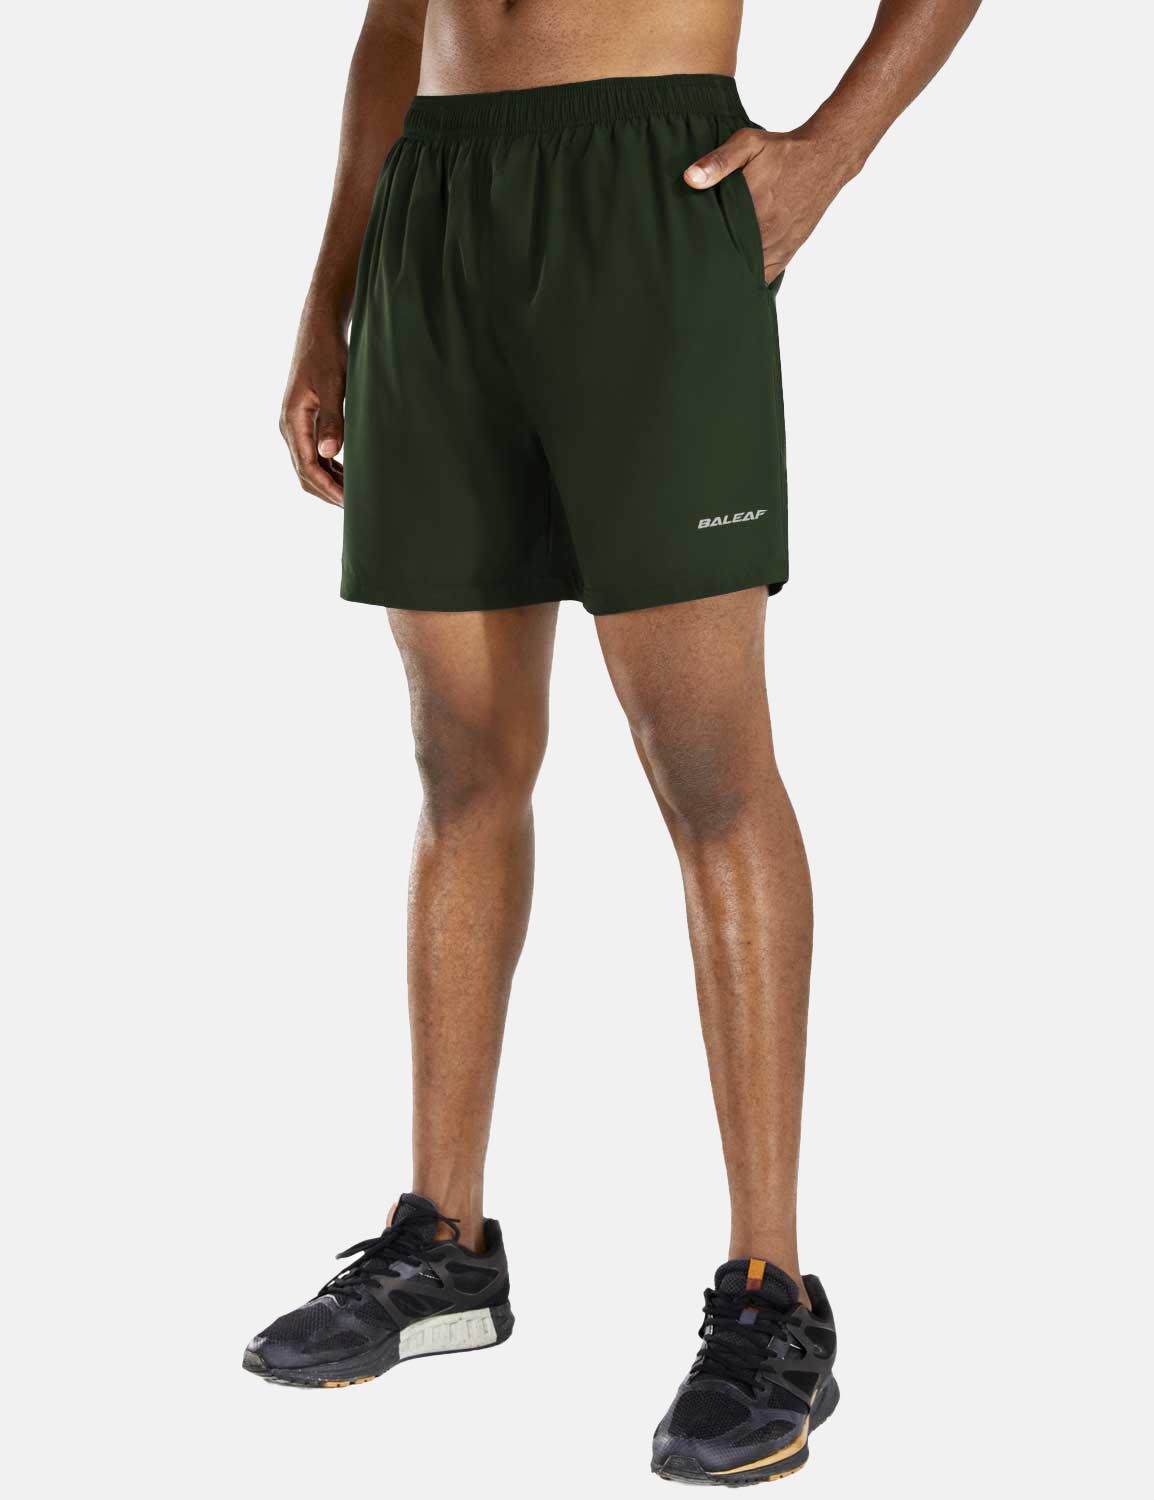 Baleaf Men's 5'' Light-WeightBaleaf Men's 5'' Light-Weight Quick Dry Fully Lined Shorts abd215 Army Green Main